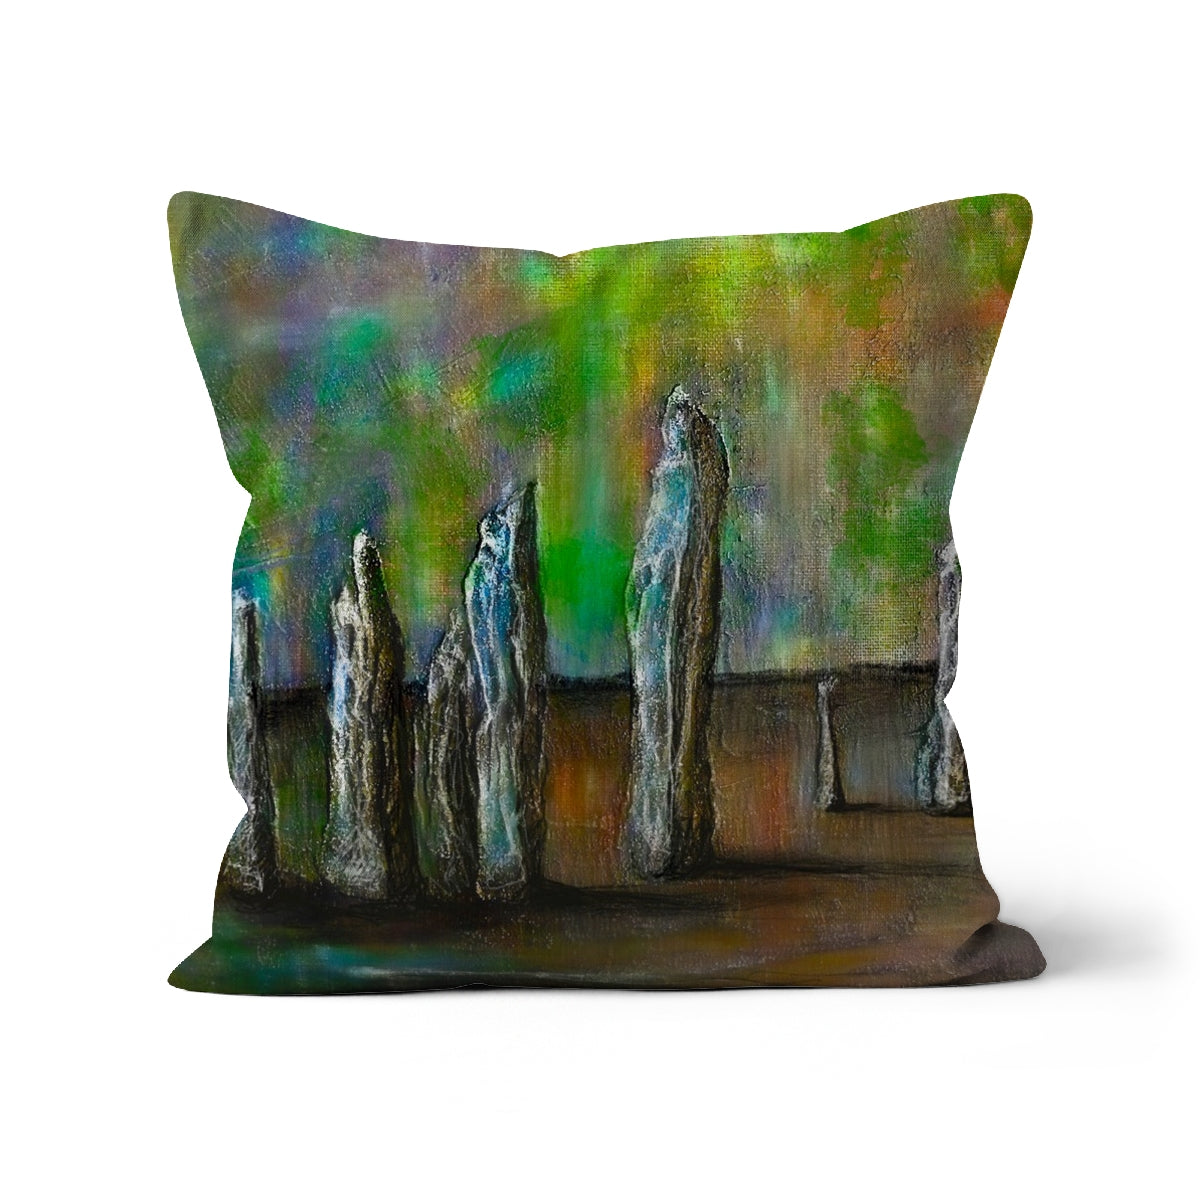 Callanish Northern Lights Art Gifts Cushion-Cushions-Hebridean Islands Art Gallery-Canvas-18"x18"-Paintings, Prints, Homeware, Art Gifts From Scotland By Scottish Artist Kevin Hunter